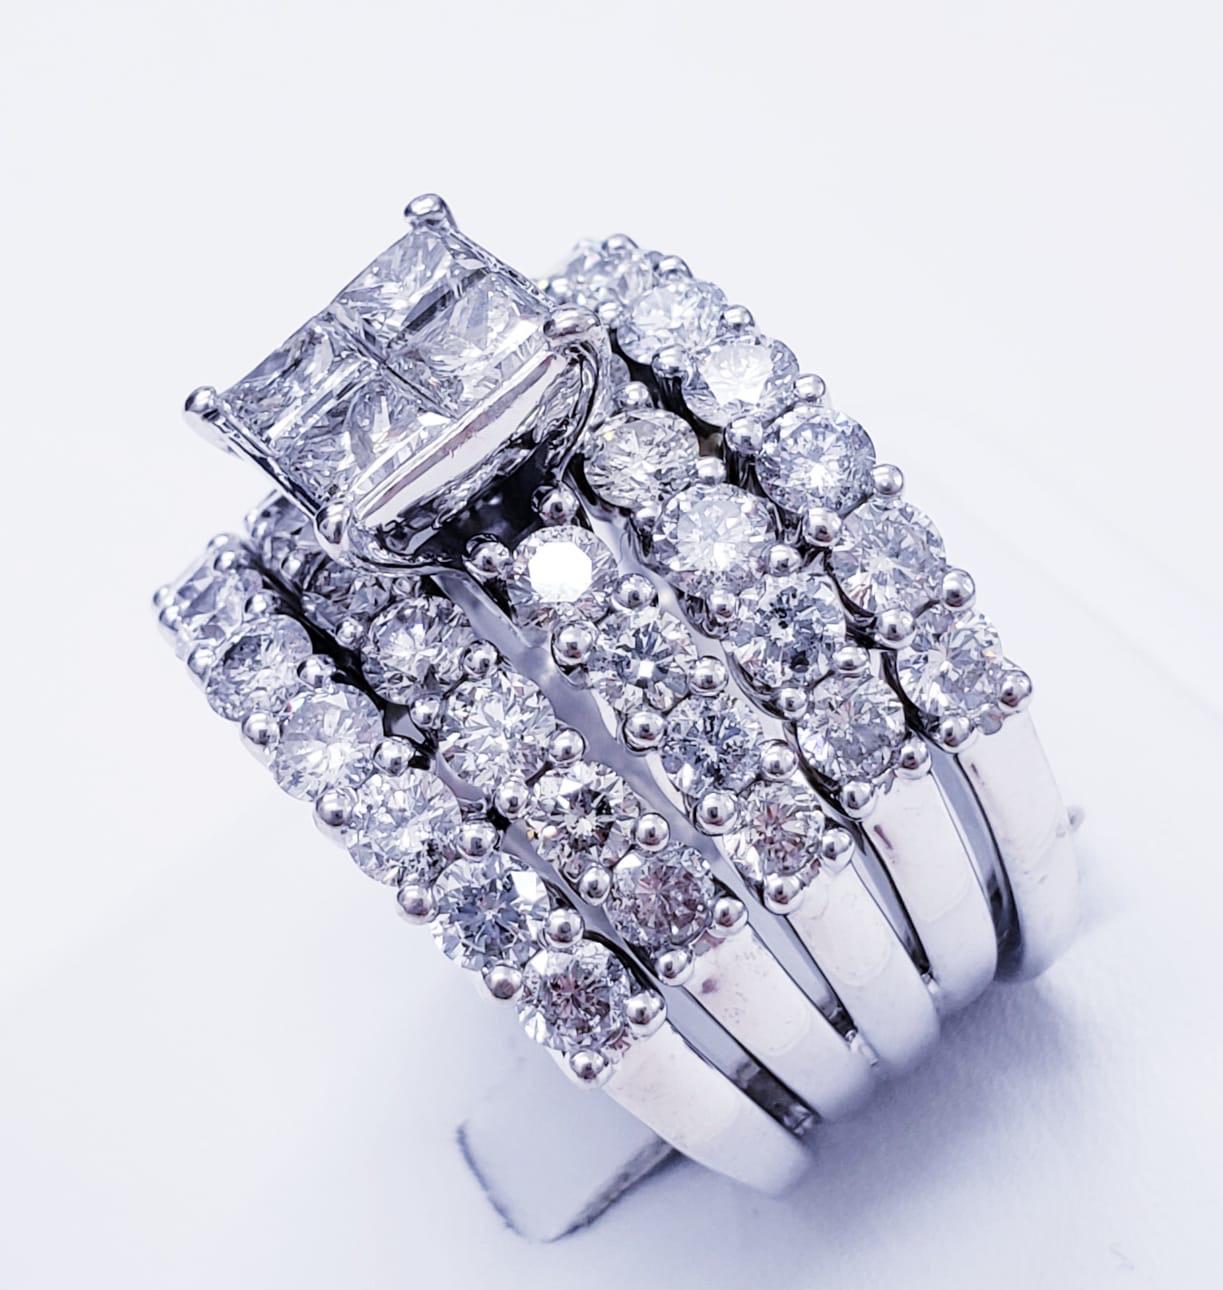 Modern 9 Carats Diamonds Half Eternity 6 Row Engagement Ring. The diamonds total weight approx 9 carats. The ring is a size 8.5 and the weight of the ring is 22.2 grams solid 14k white gold. The ring measures 23.1mm X 17.6mm
Circa 21st Century